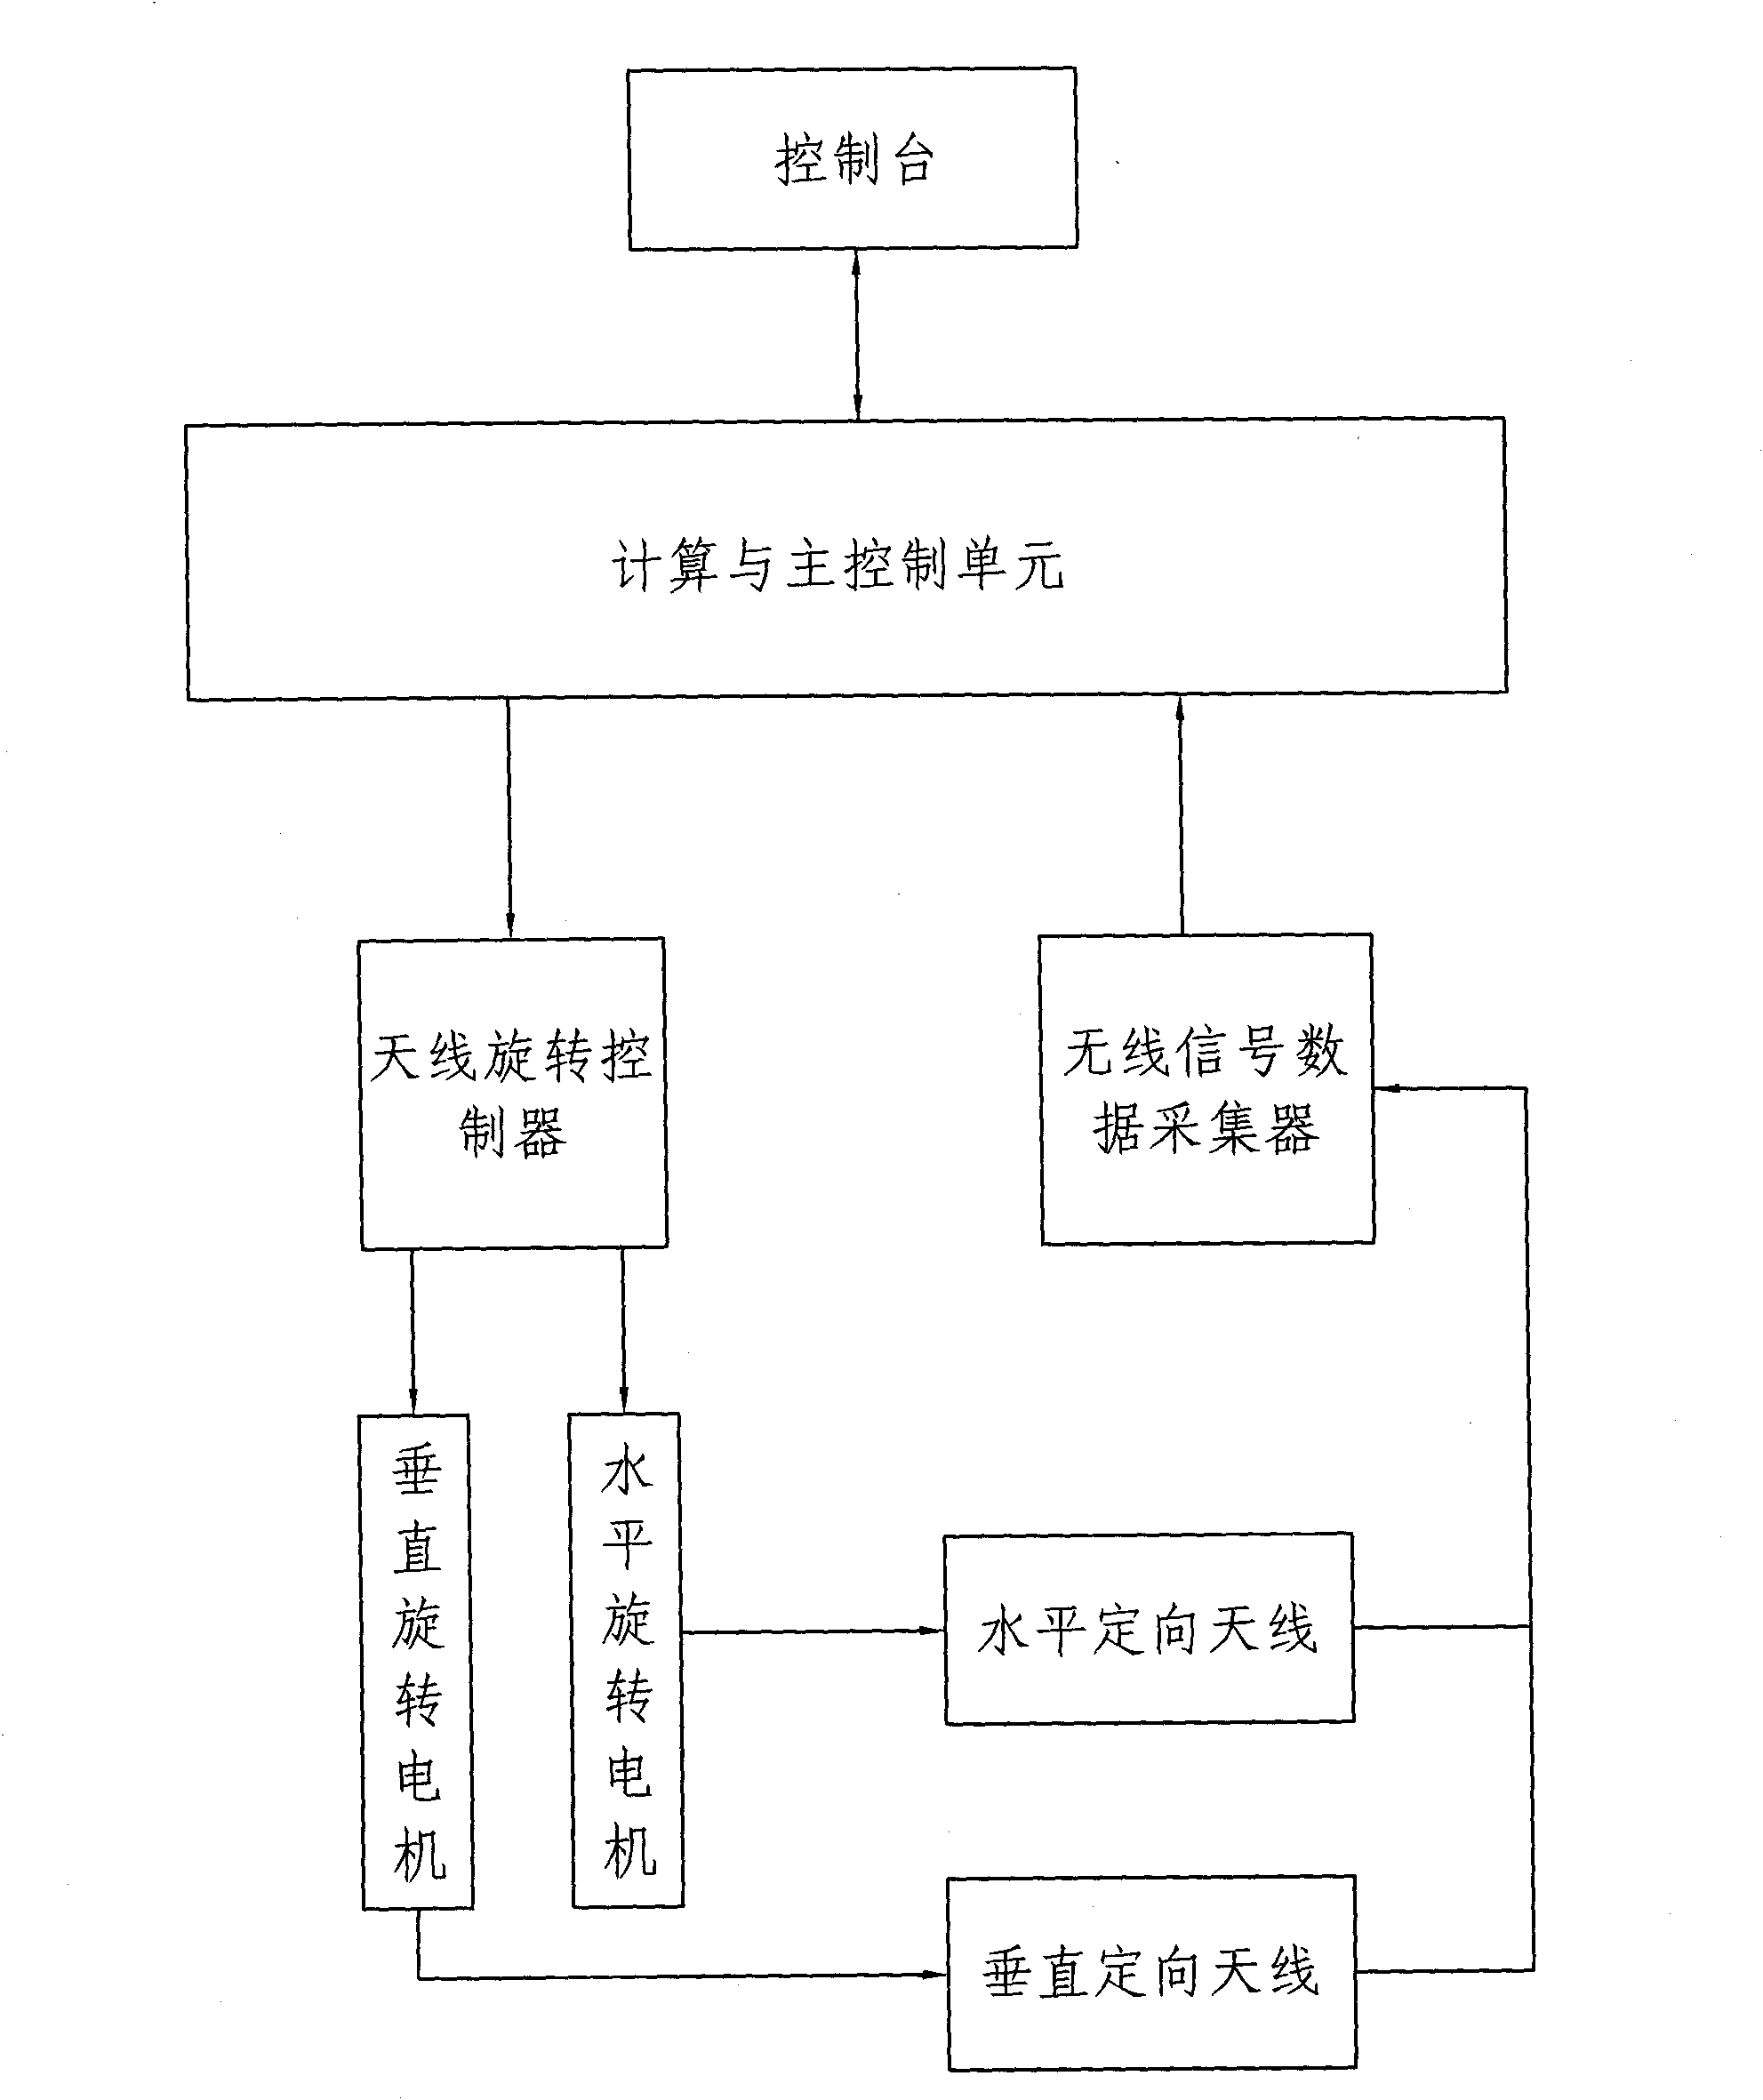 Method and device for positioning and tracking equipment in wireless local land area